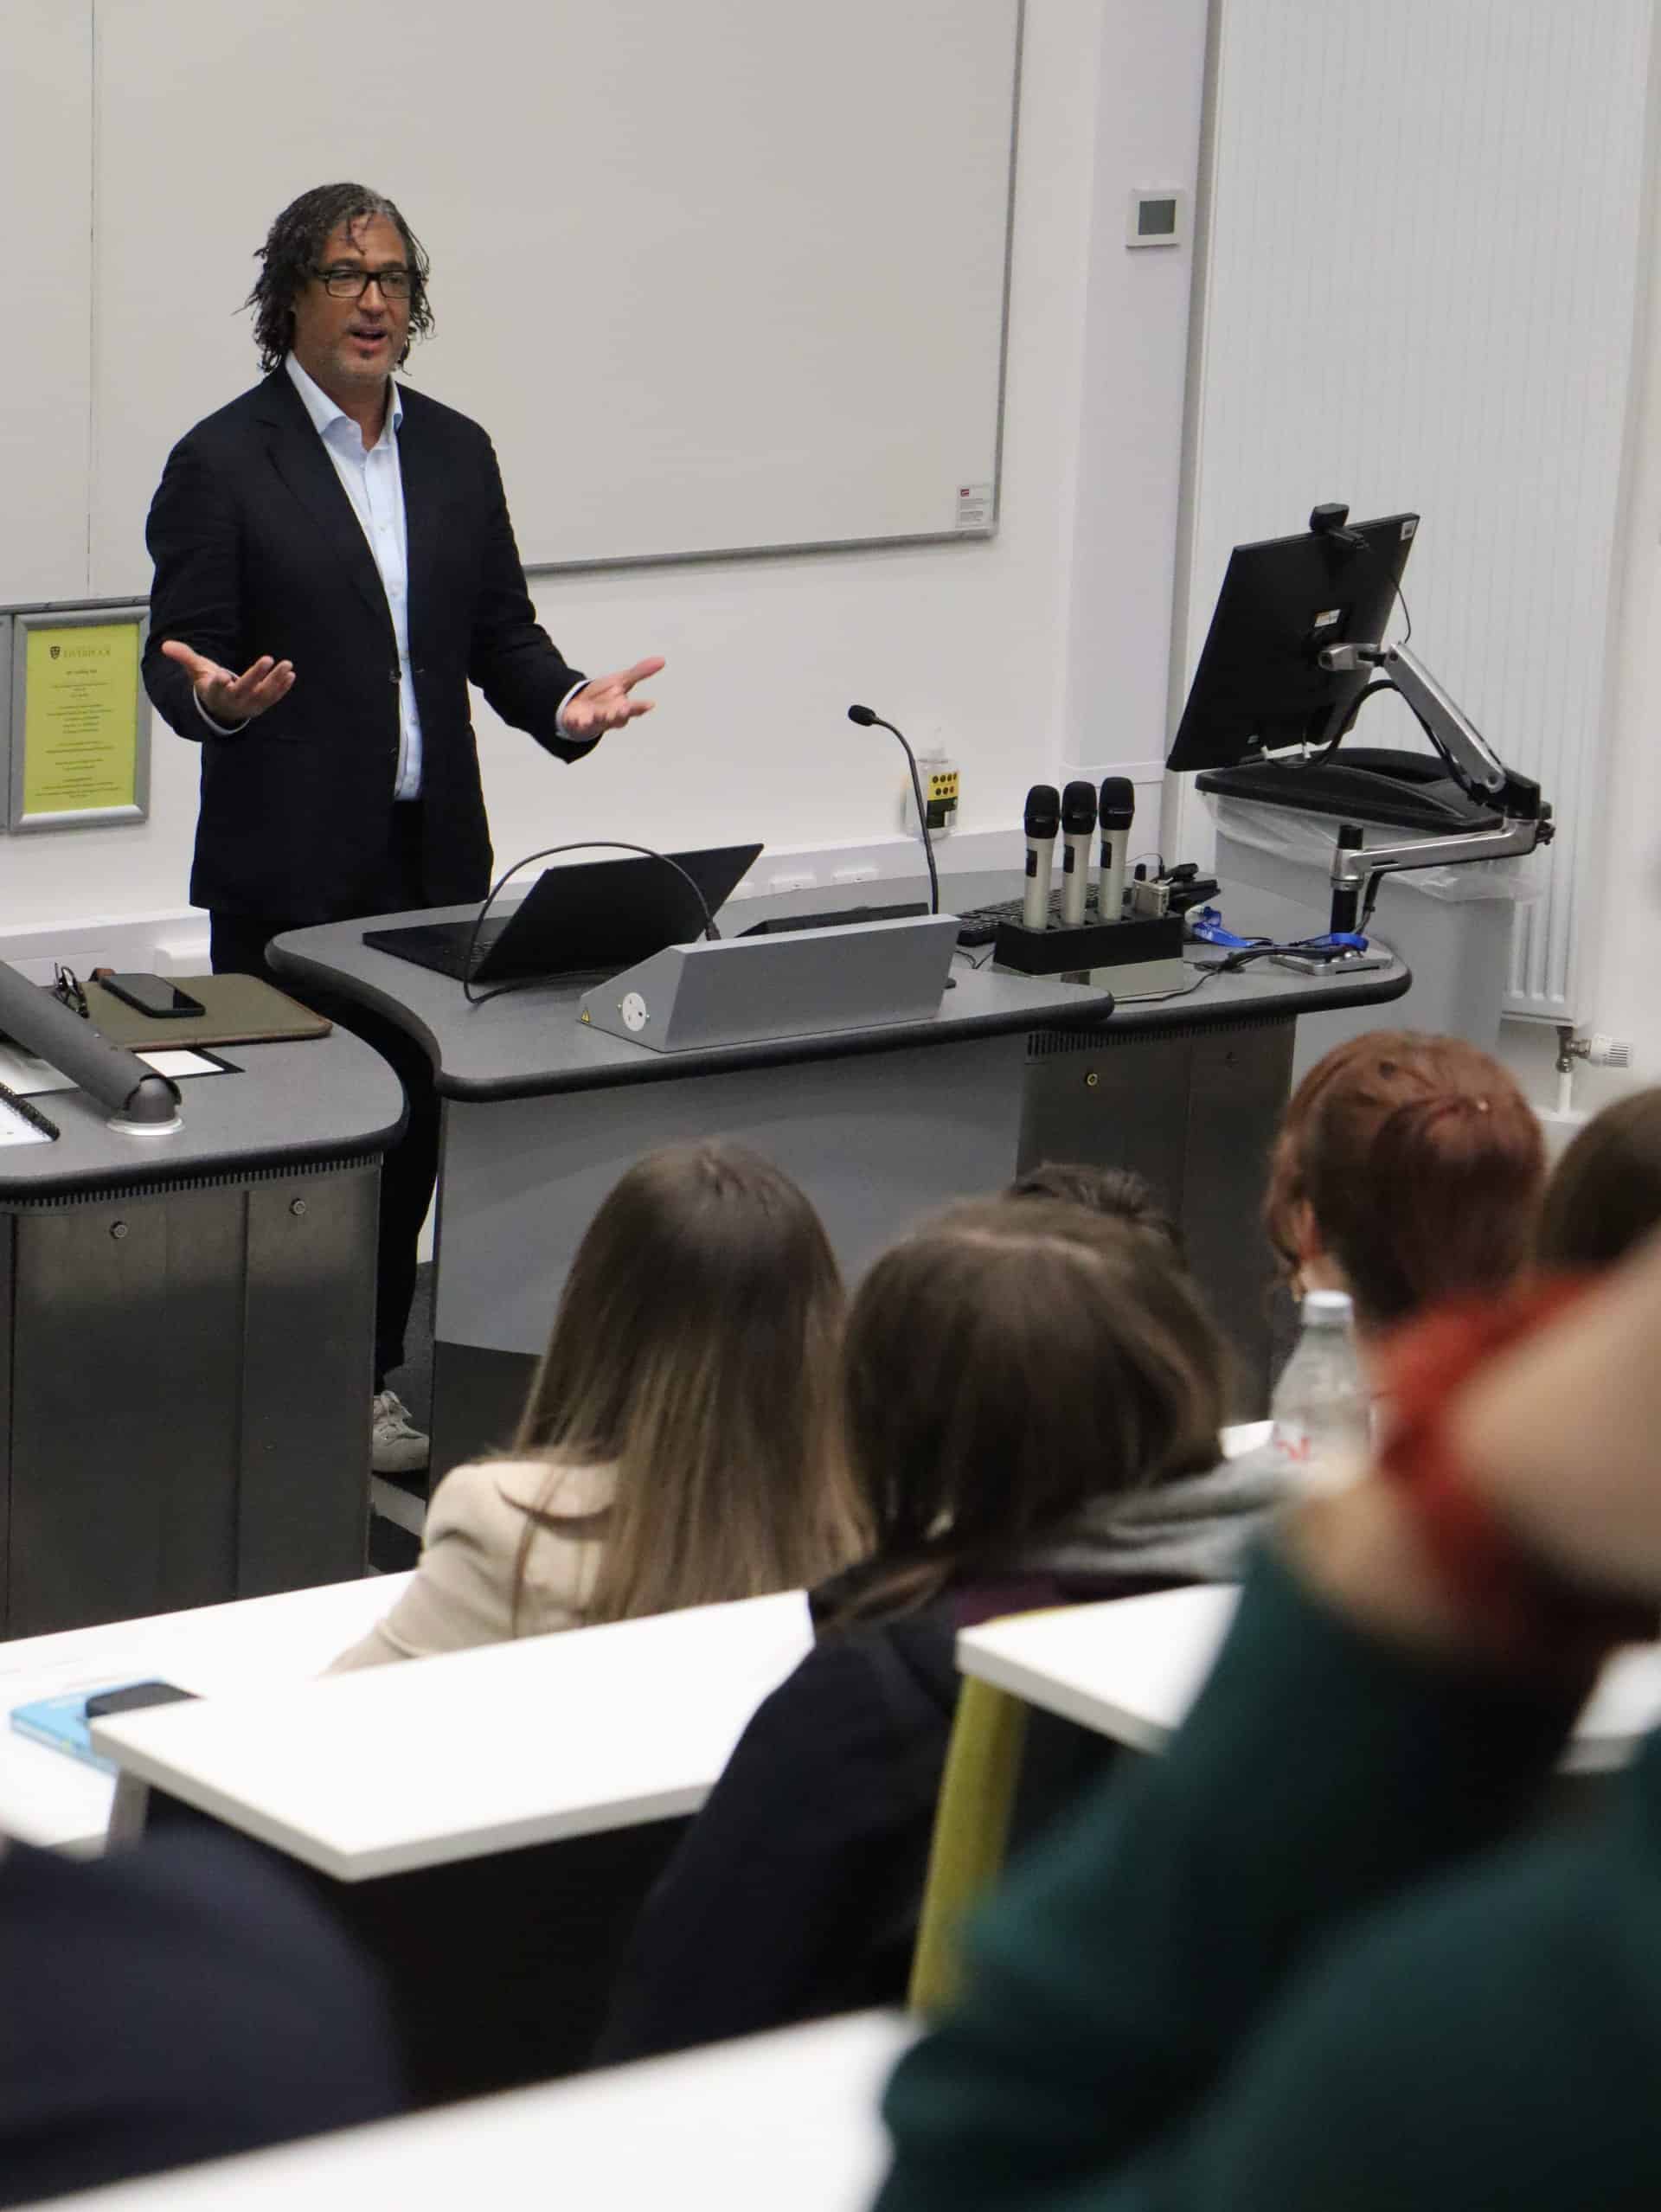 David Olusoga OBE delivers a talk to Apertura students in a lecture theatre at the University of Liverpool.